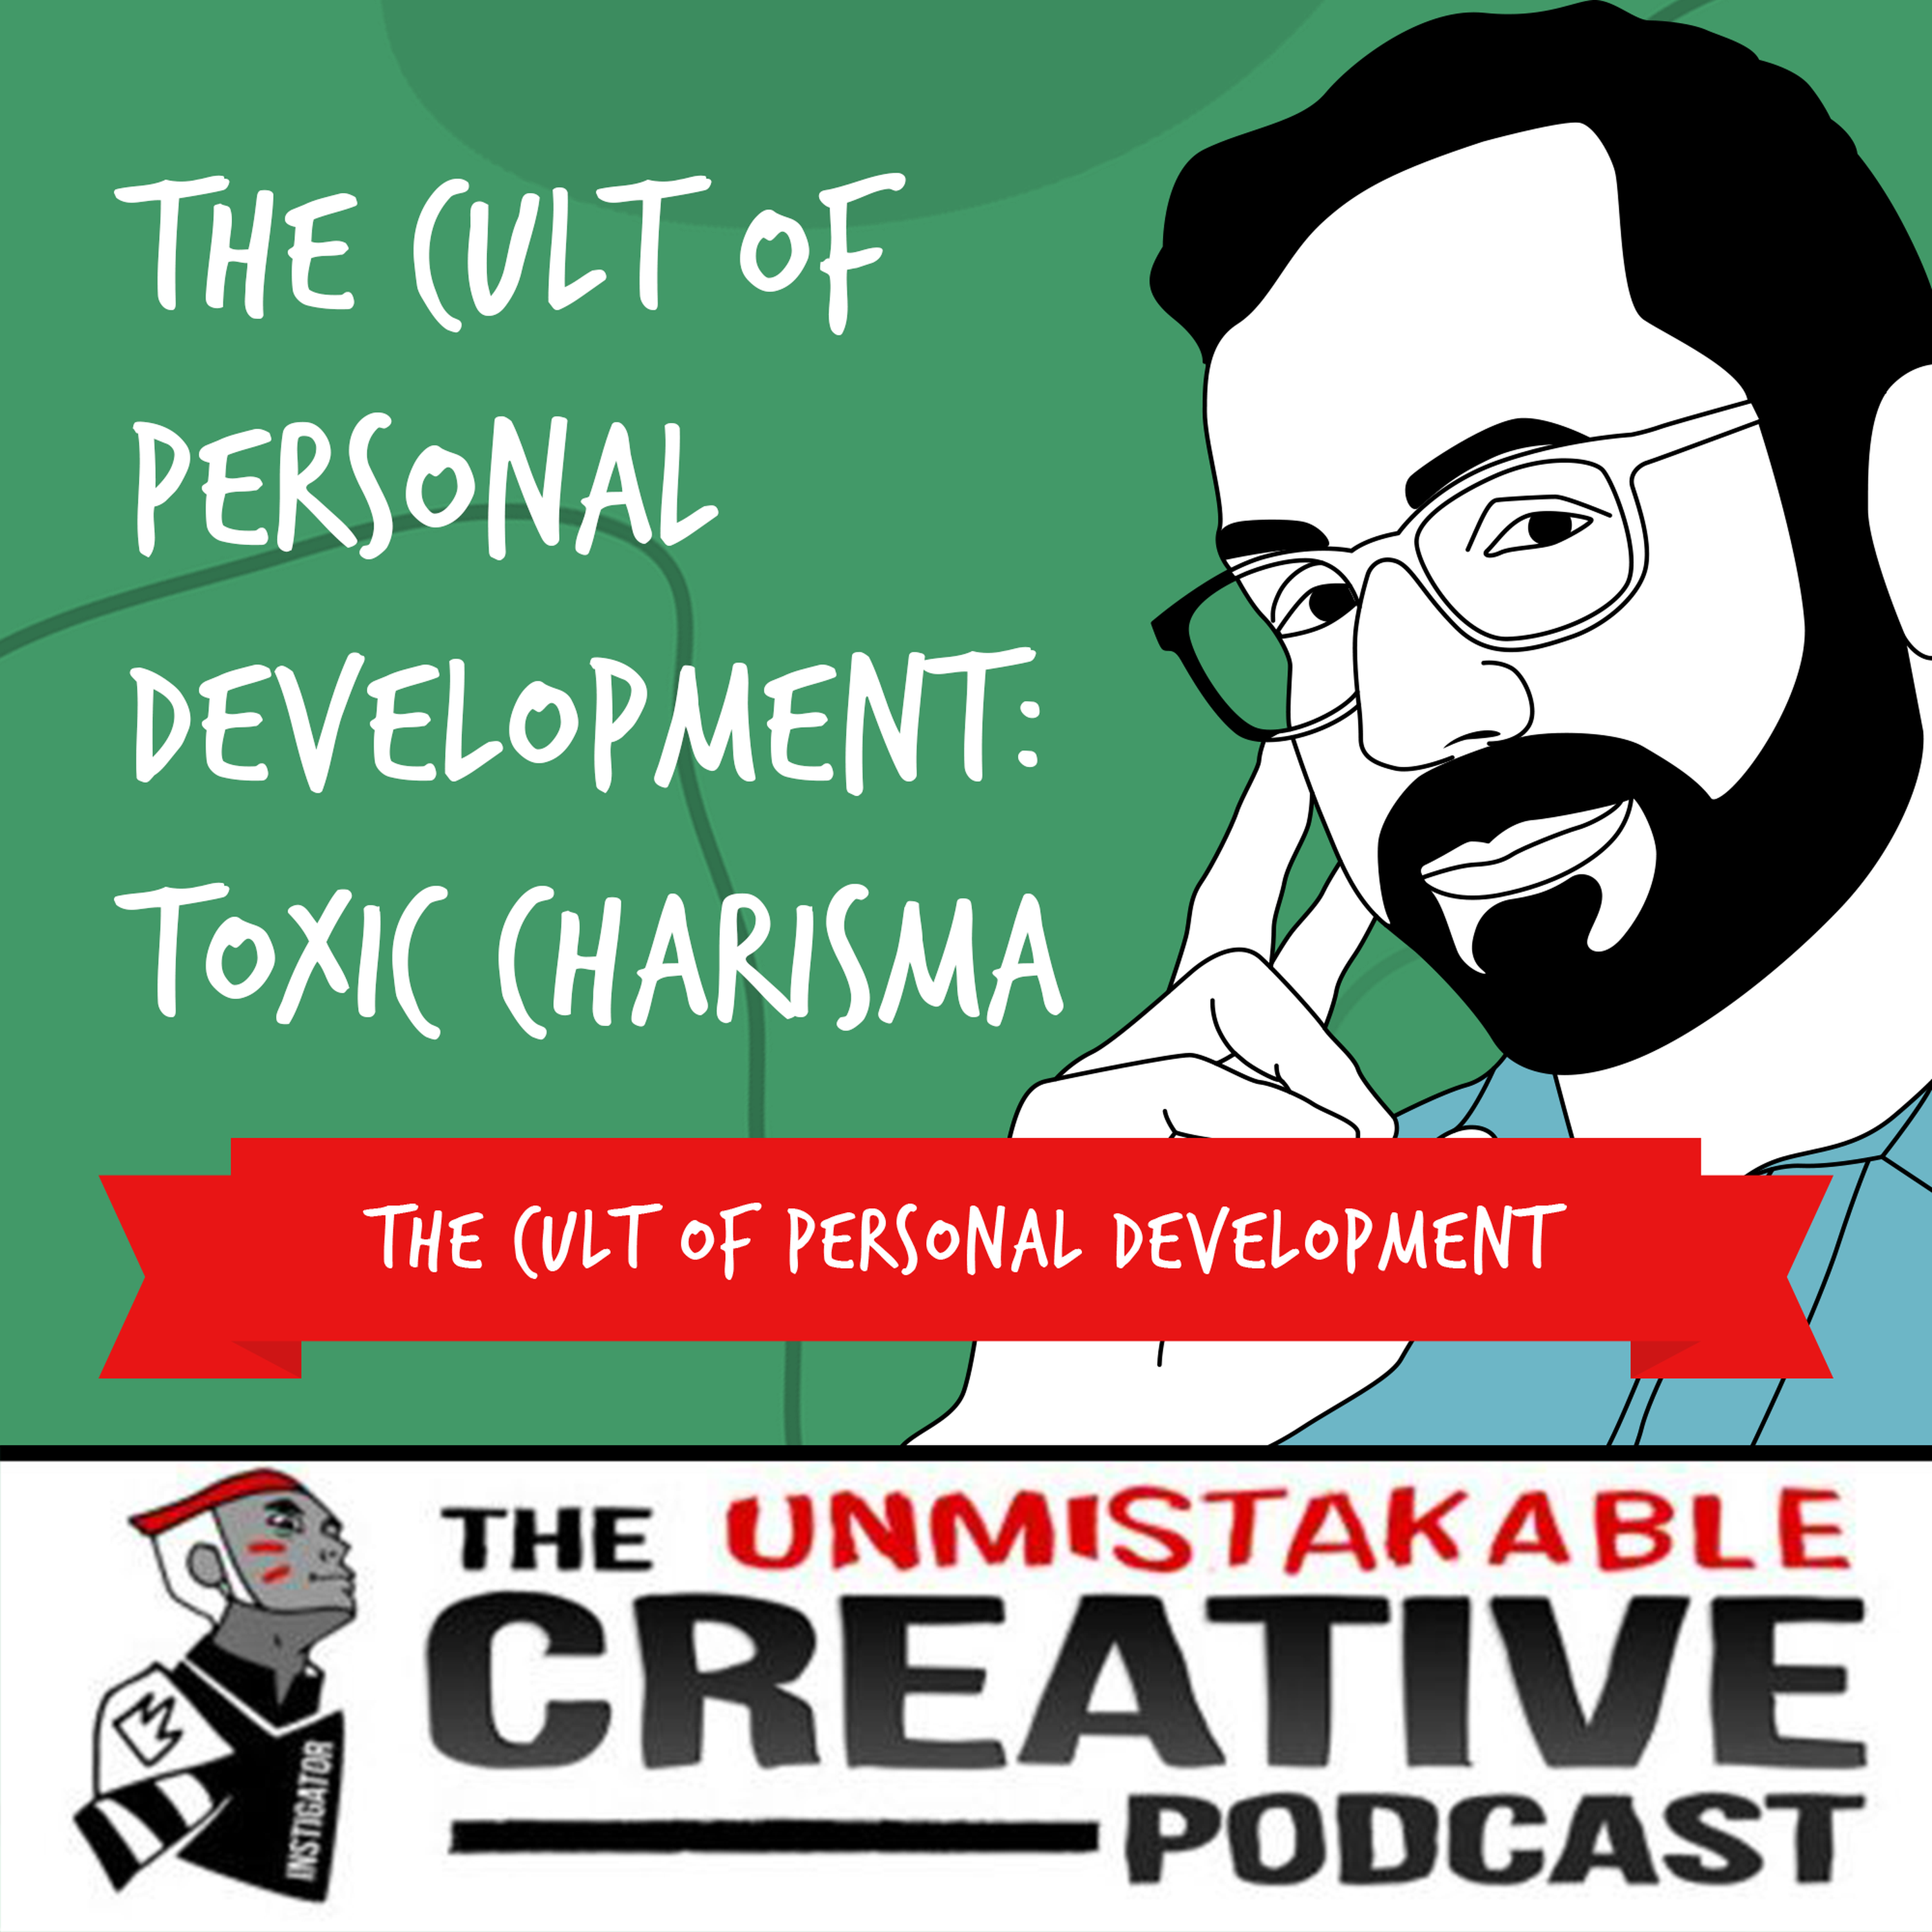 The Cult of Personal Development: Toxic Charisma with Bob Gower Image